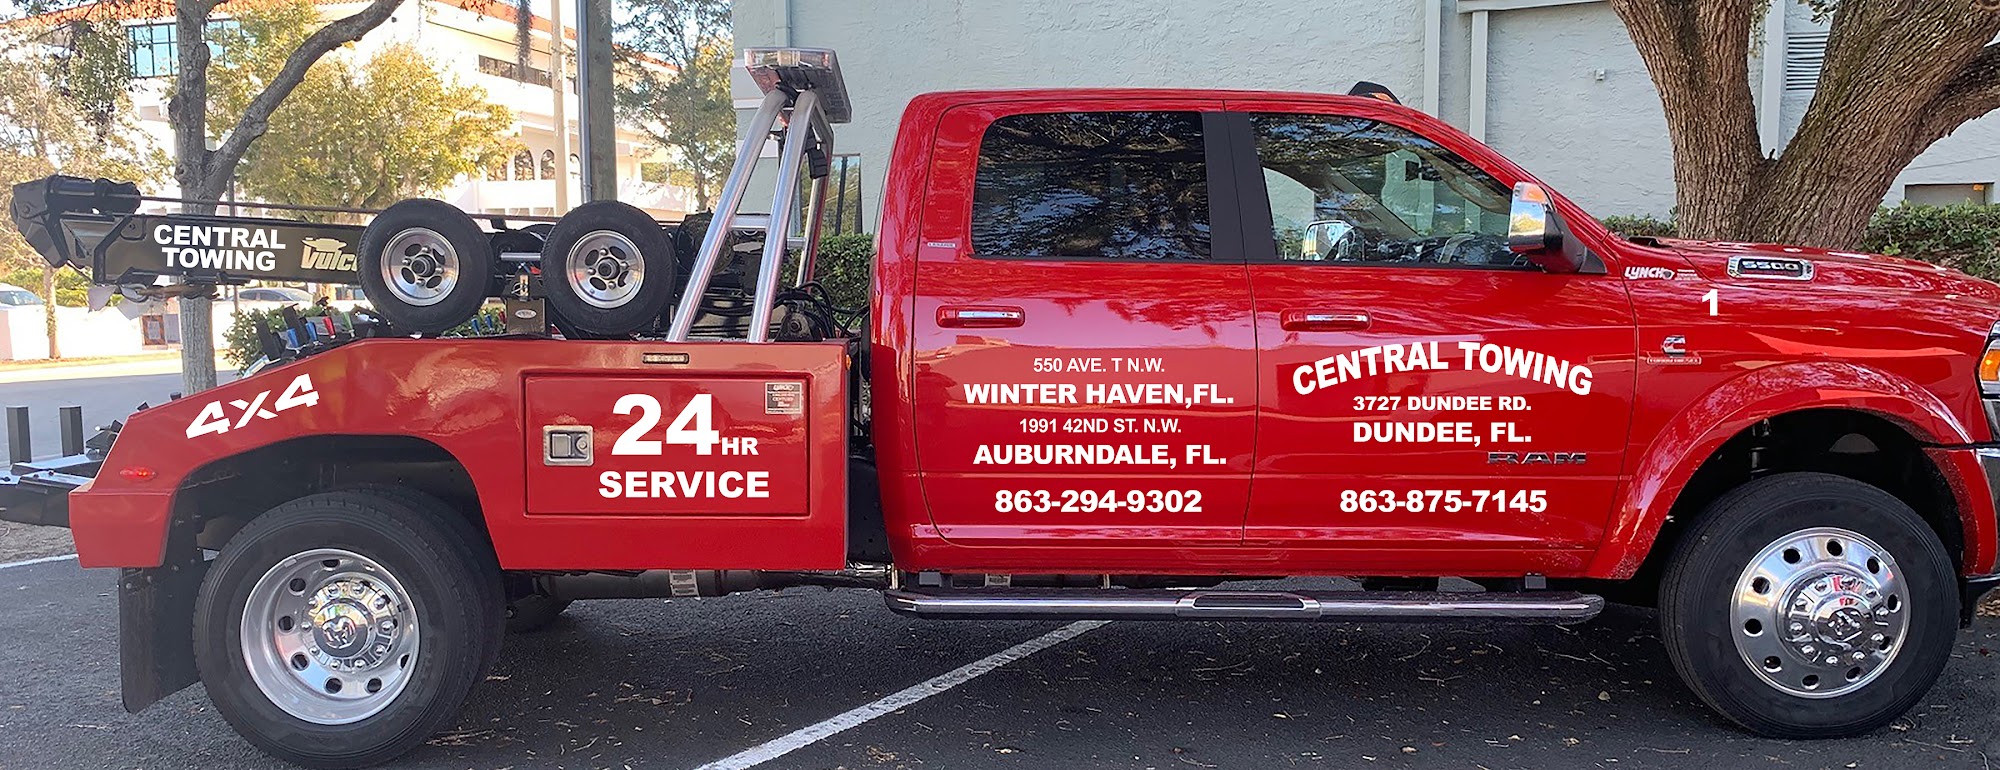 Central Towing of Winter Haven, Inc.